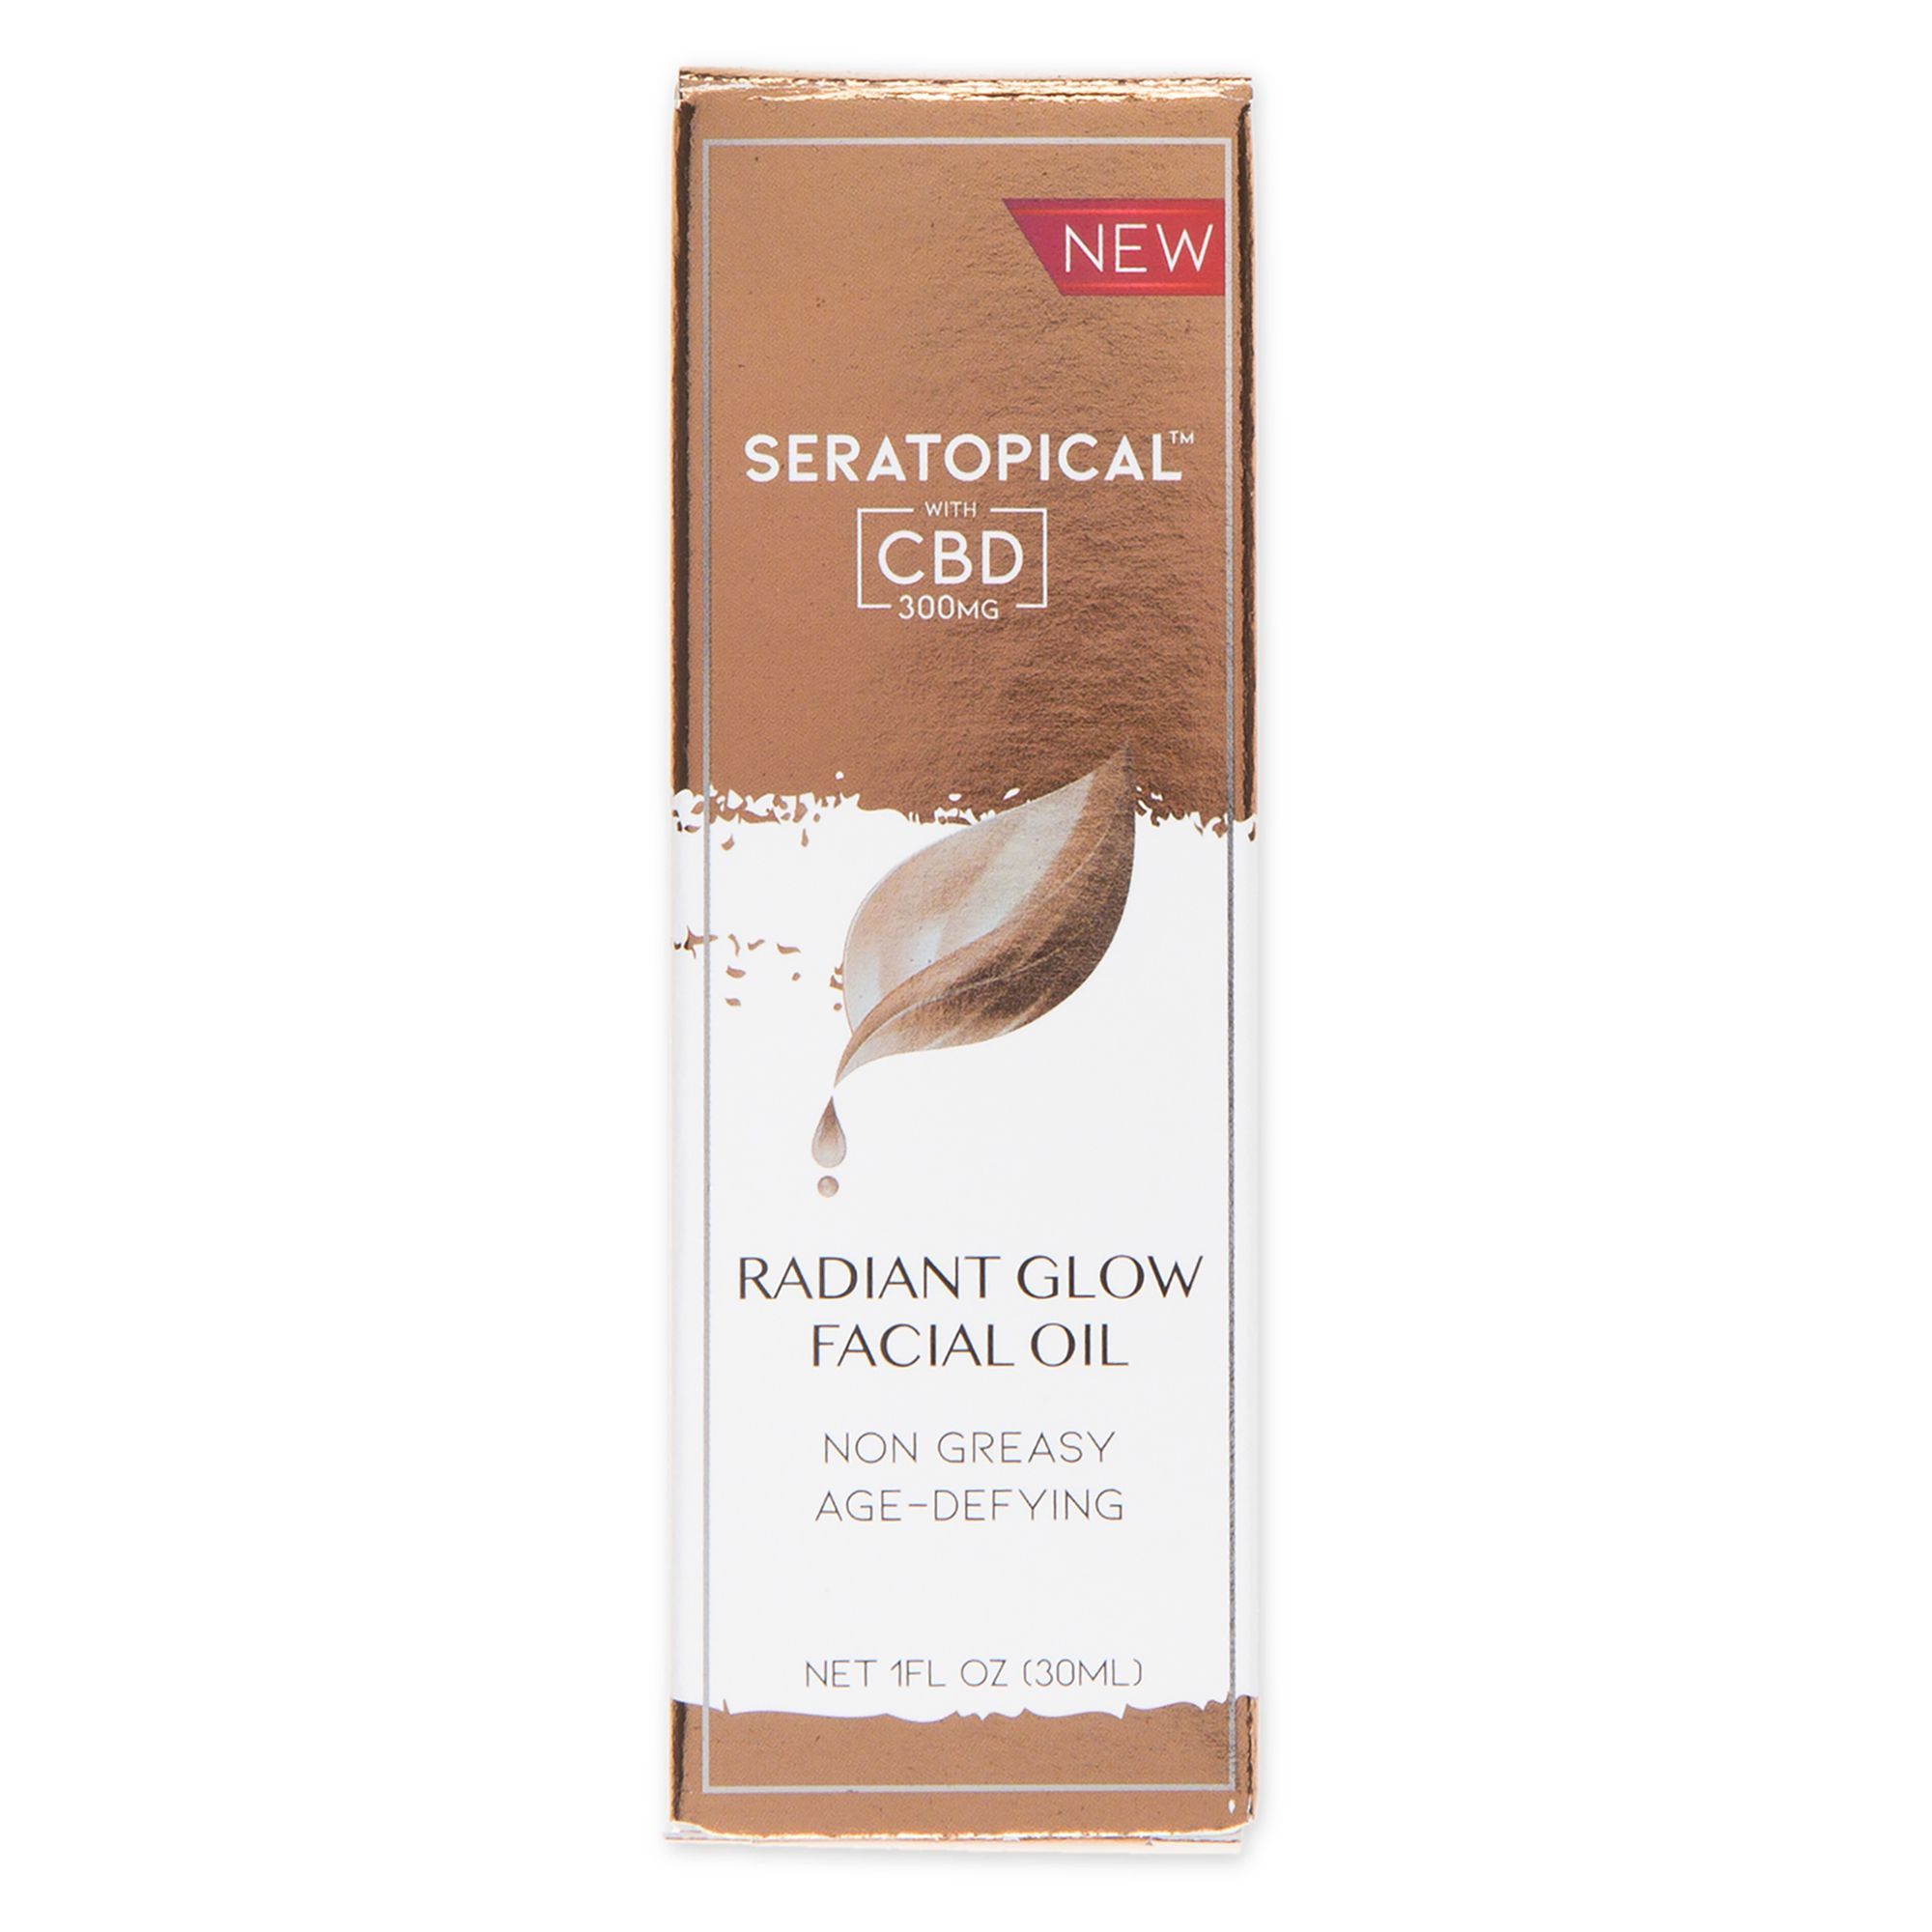 Seratopical Radiant Glow Facial Oil with CBD